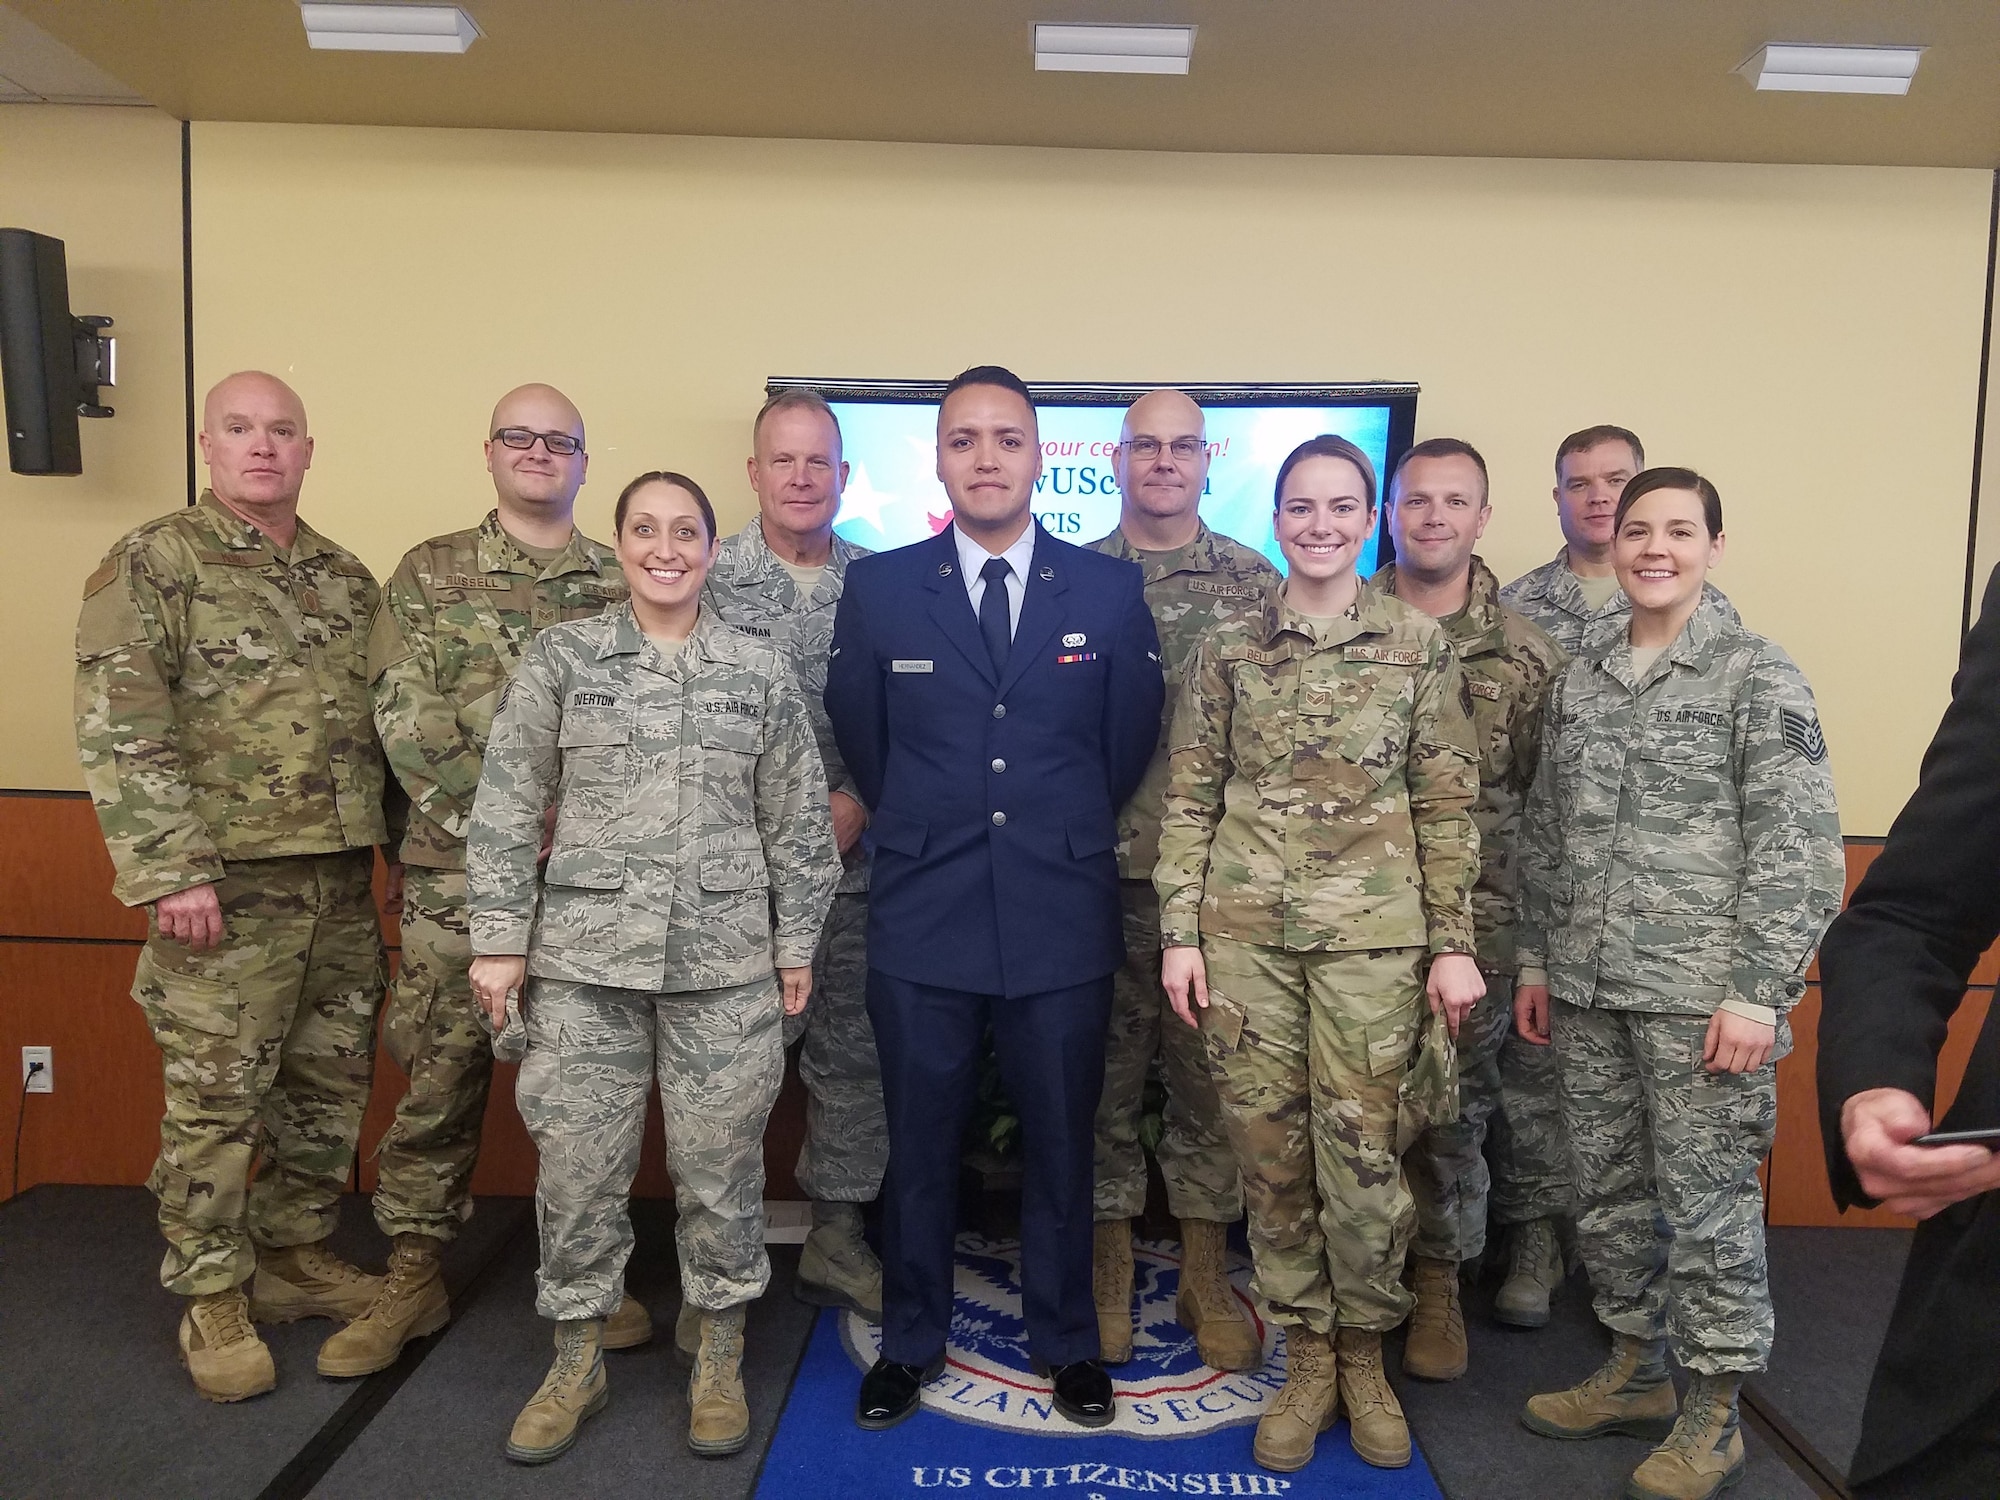 Airman David Hernandez (blue uniform), stands with members of the 132d Wing who came to watch him take the oath of allegiance as an American citizen December 20, 2019, in Des Moines, Iowa. (Courtesy Photo)